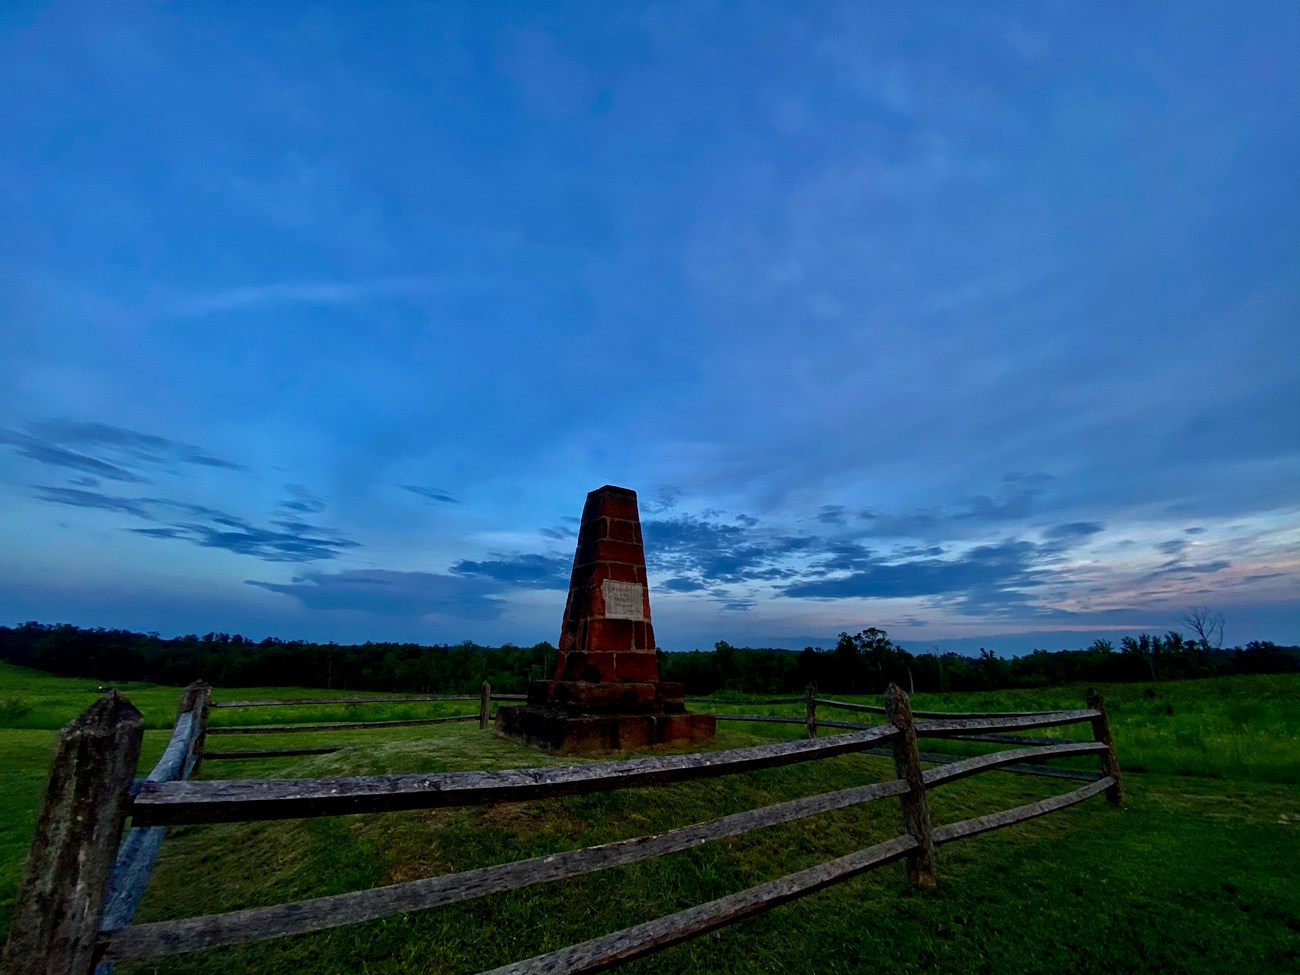 Deep Cut Monument stands in foreground, sunsetting in the distance behind treeline